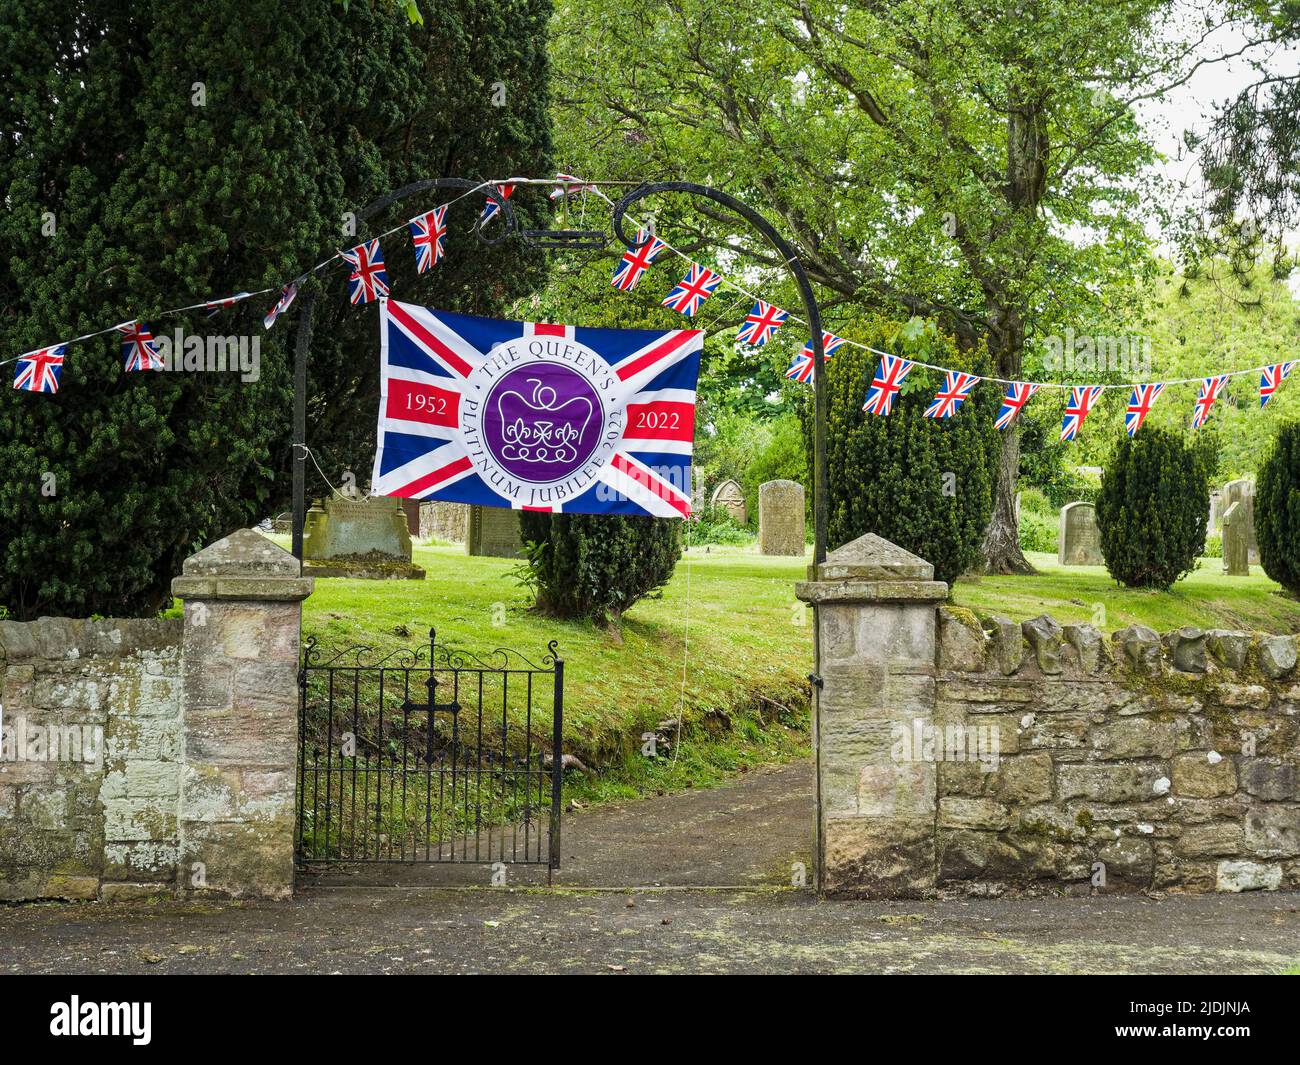 Flag and bunting in celebration of the platinum jubilee of Queen Elizabeth the second in a Northumberland village. Stock Photo